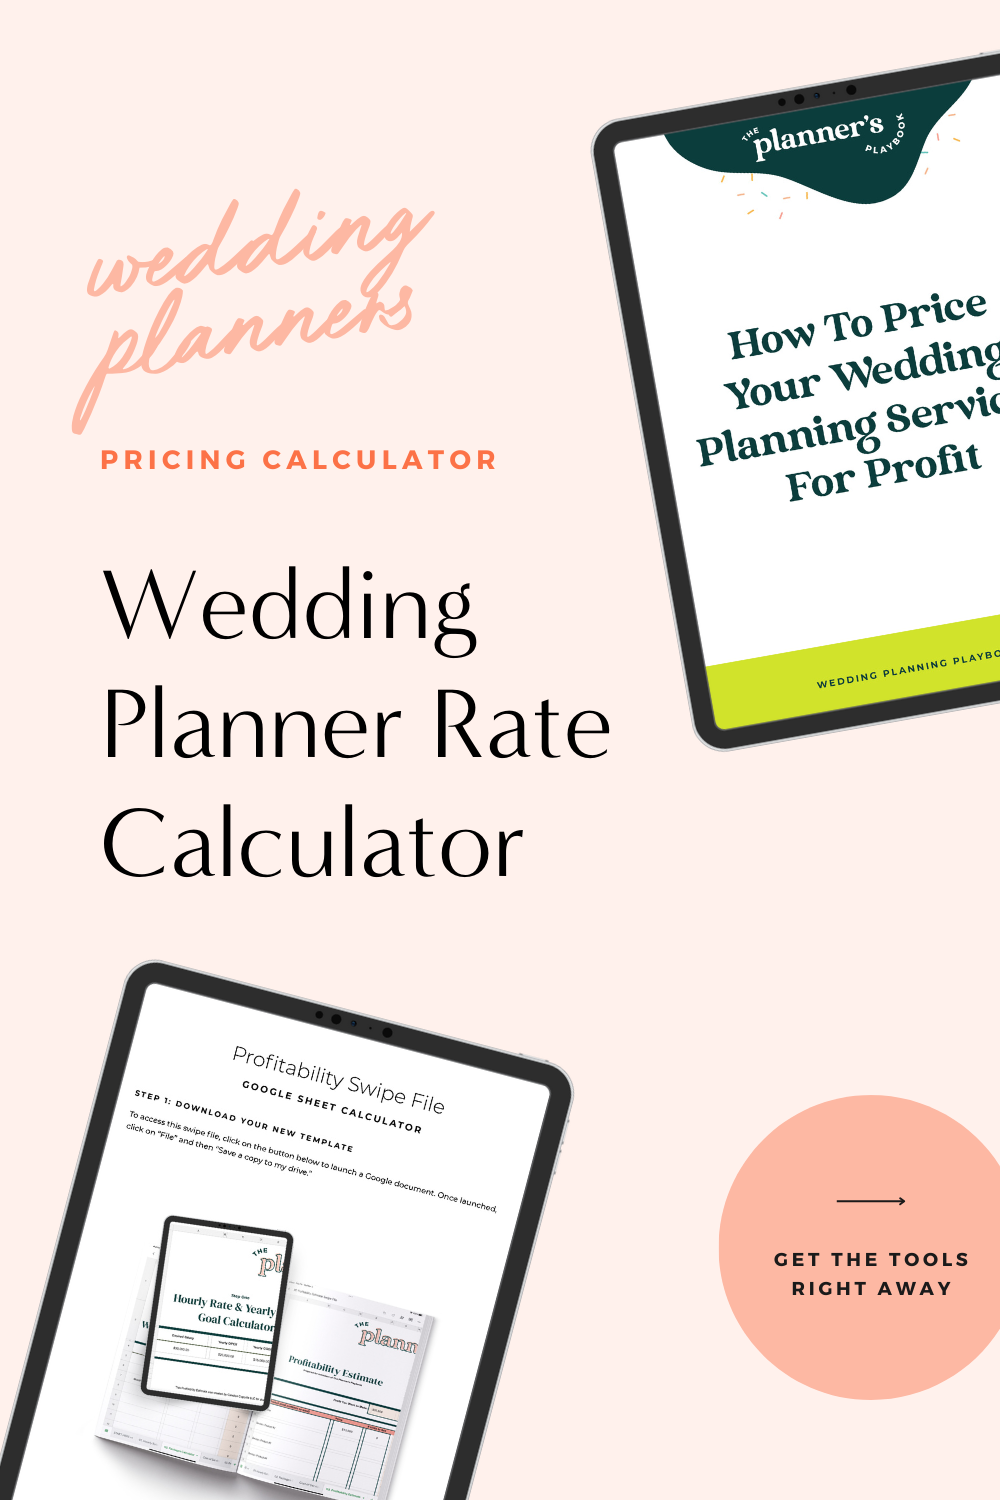 How much should you charge for your wedding planning services, and what pricing method makes the most sense for you and your customers? Inside this Playbook, I teach you how to confidently price your wedding planning services and give you the tools you need to become profitable in your business.